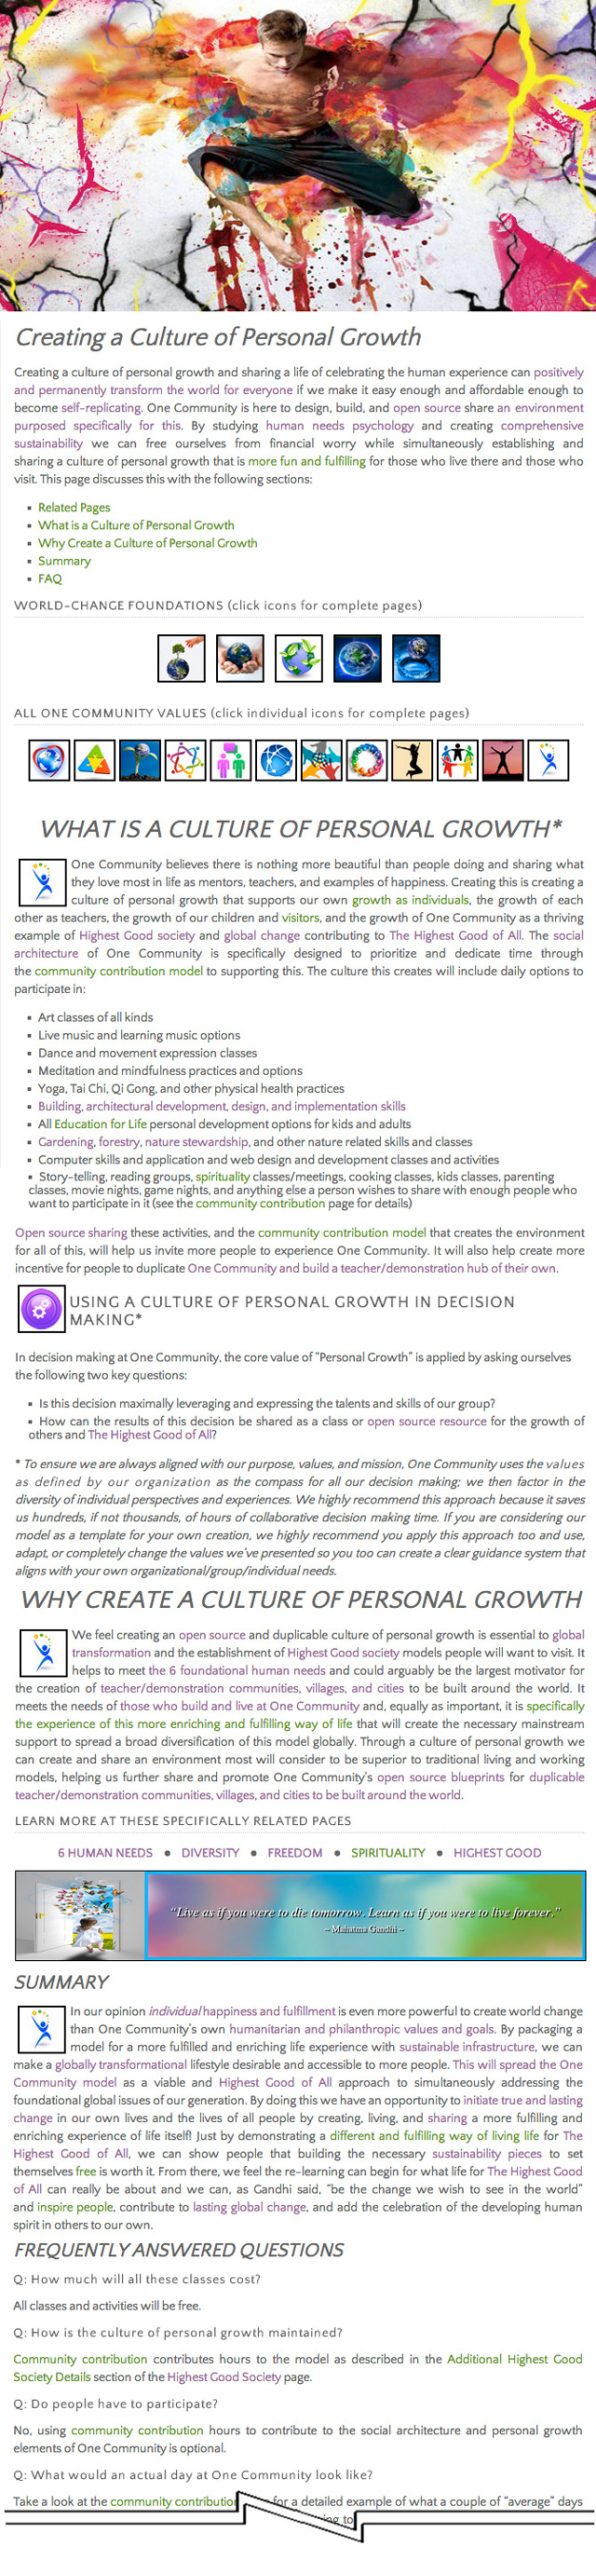 Personal Growth page, One Community, World Game-Changing Solutions